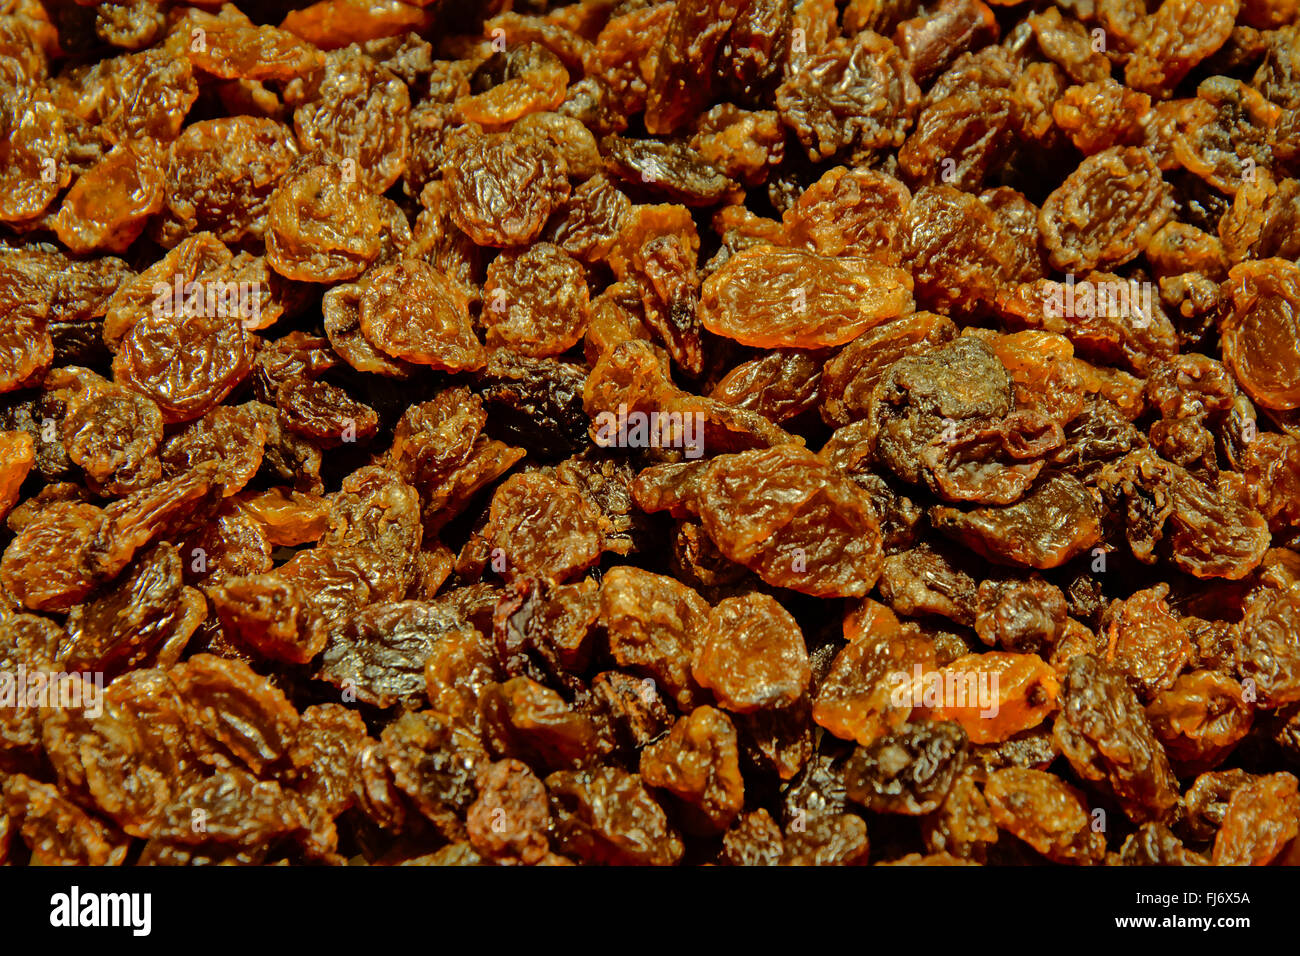 background filled with raisins (sultanas) Stock Photo